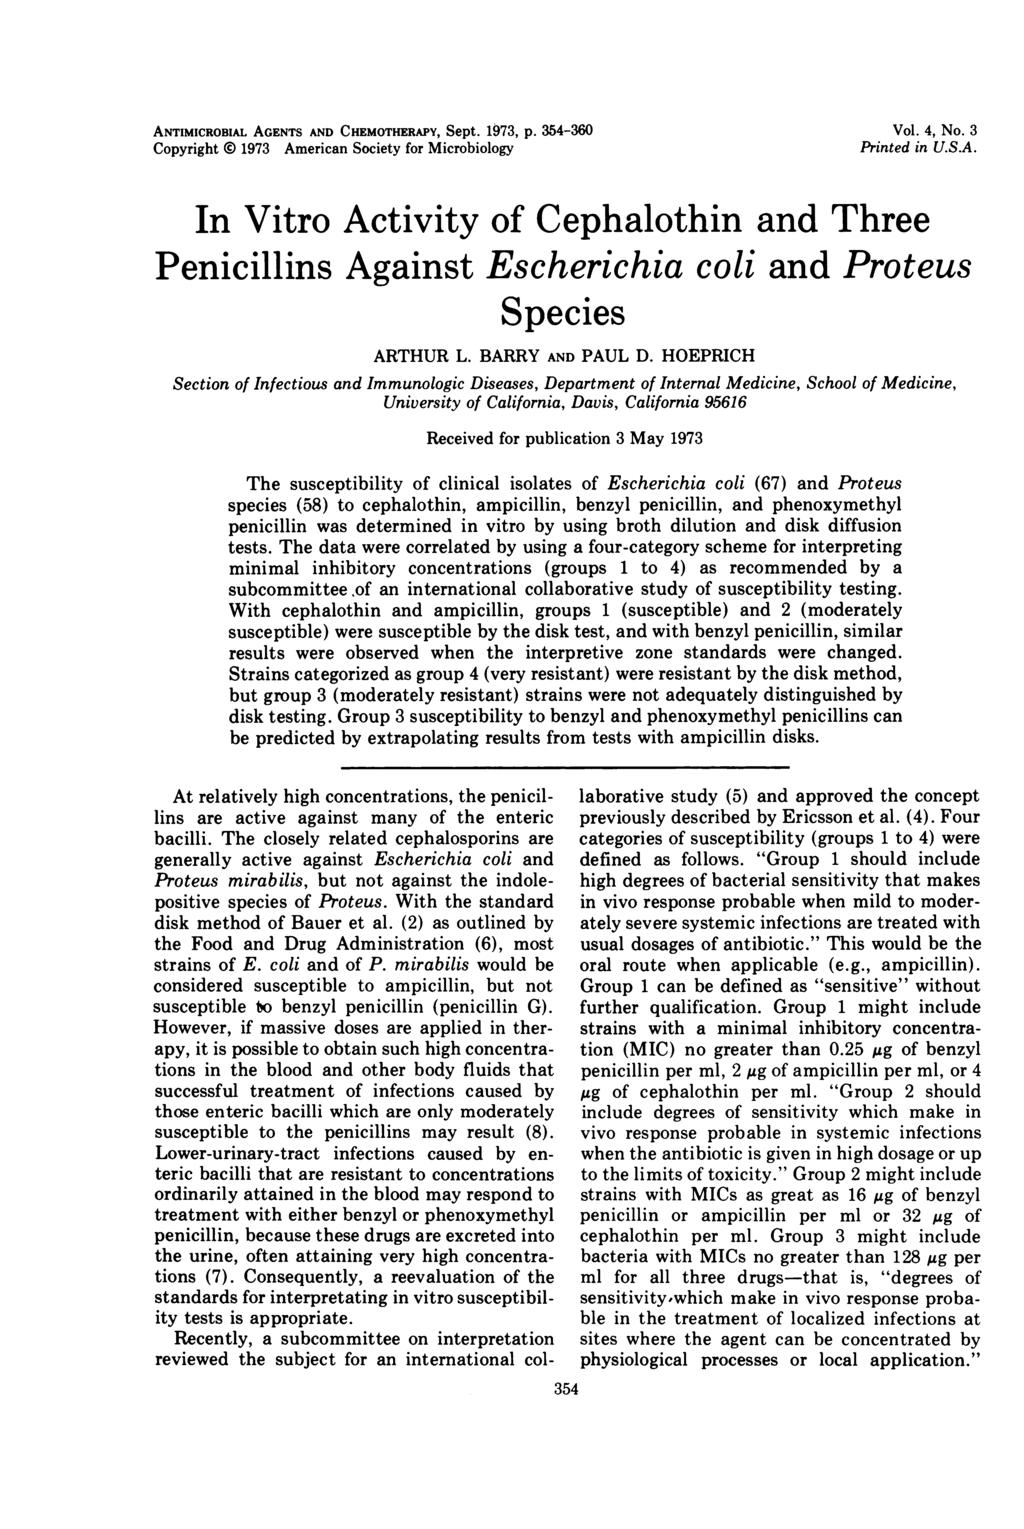 ANTIMICROBIAL AGENTS AND CHEMOTHERAPY, Sept. 1973, p. 354-36 Copyright 1973 American Society for Microbiology Vol. 4, No. 3 Printed in U.S.A. In Vitro Activity of Cephalothin and Three Penicillins Against Escherichia coli and Proteus Species ARTHUR L.